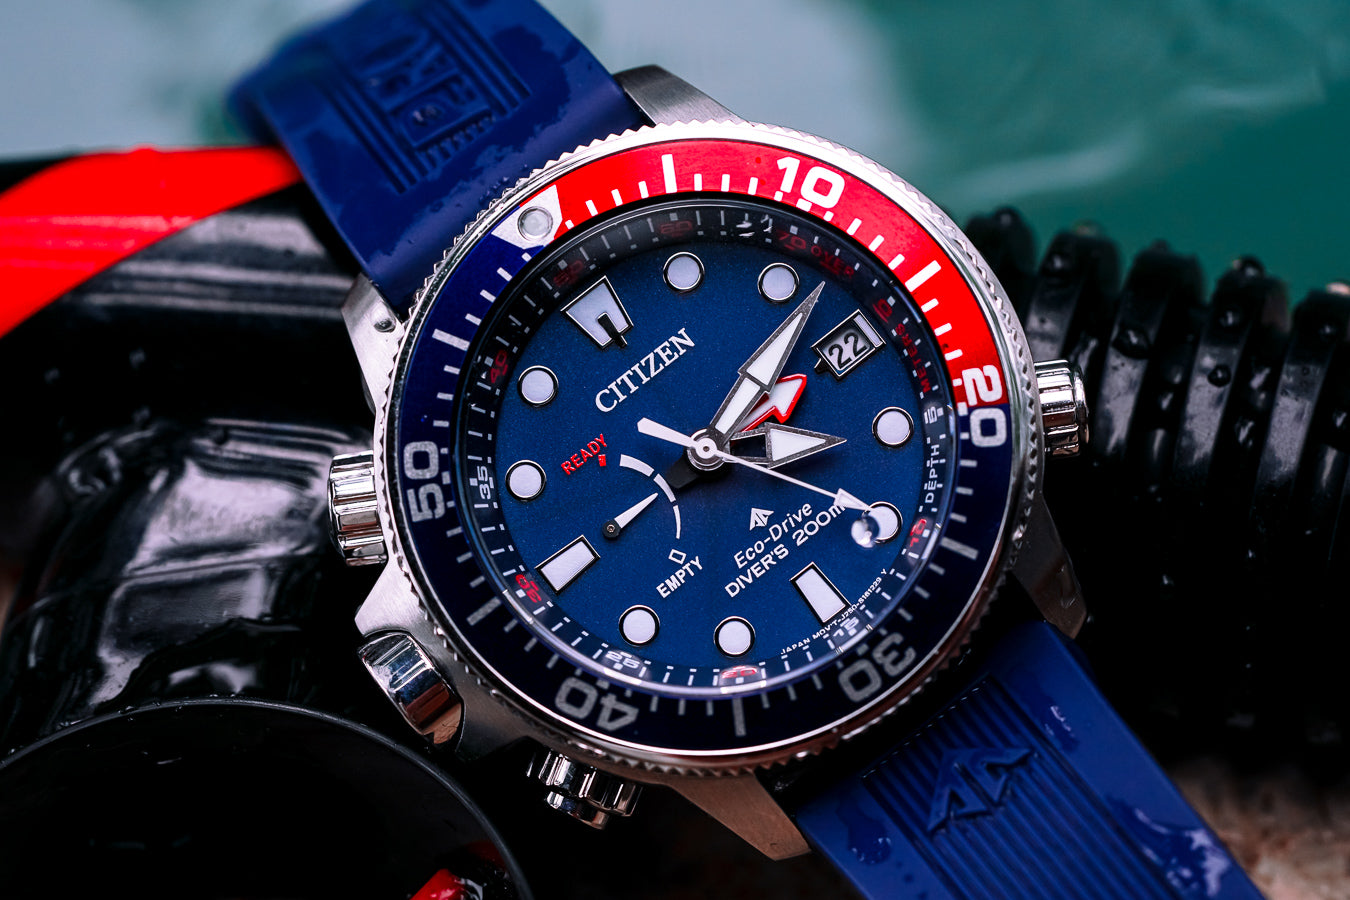 Promaster Aqualand (Blue-Red) | Citizen | Luby 